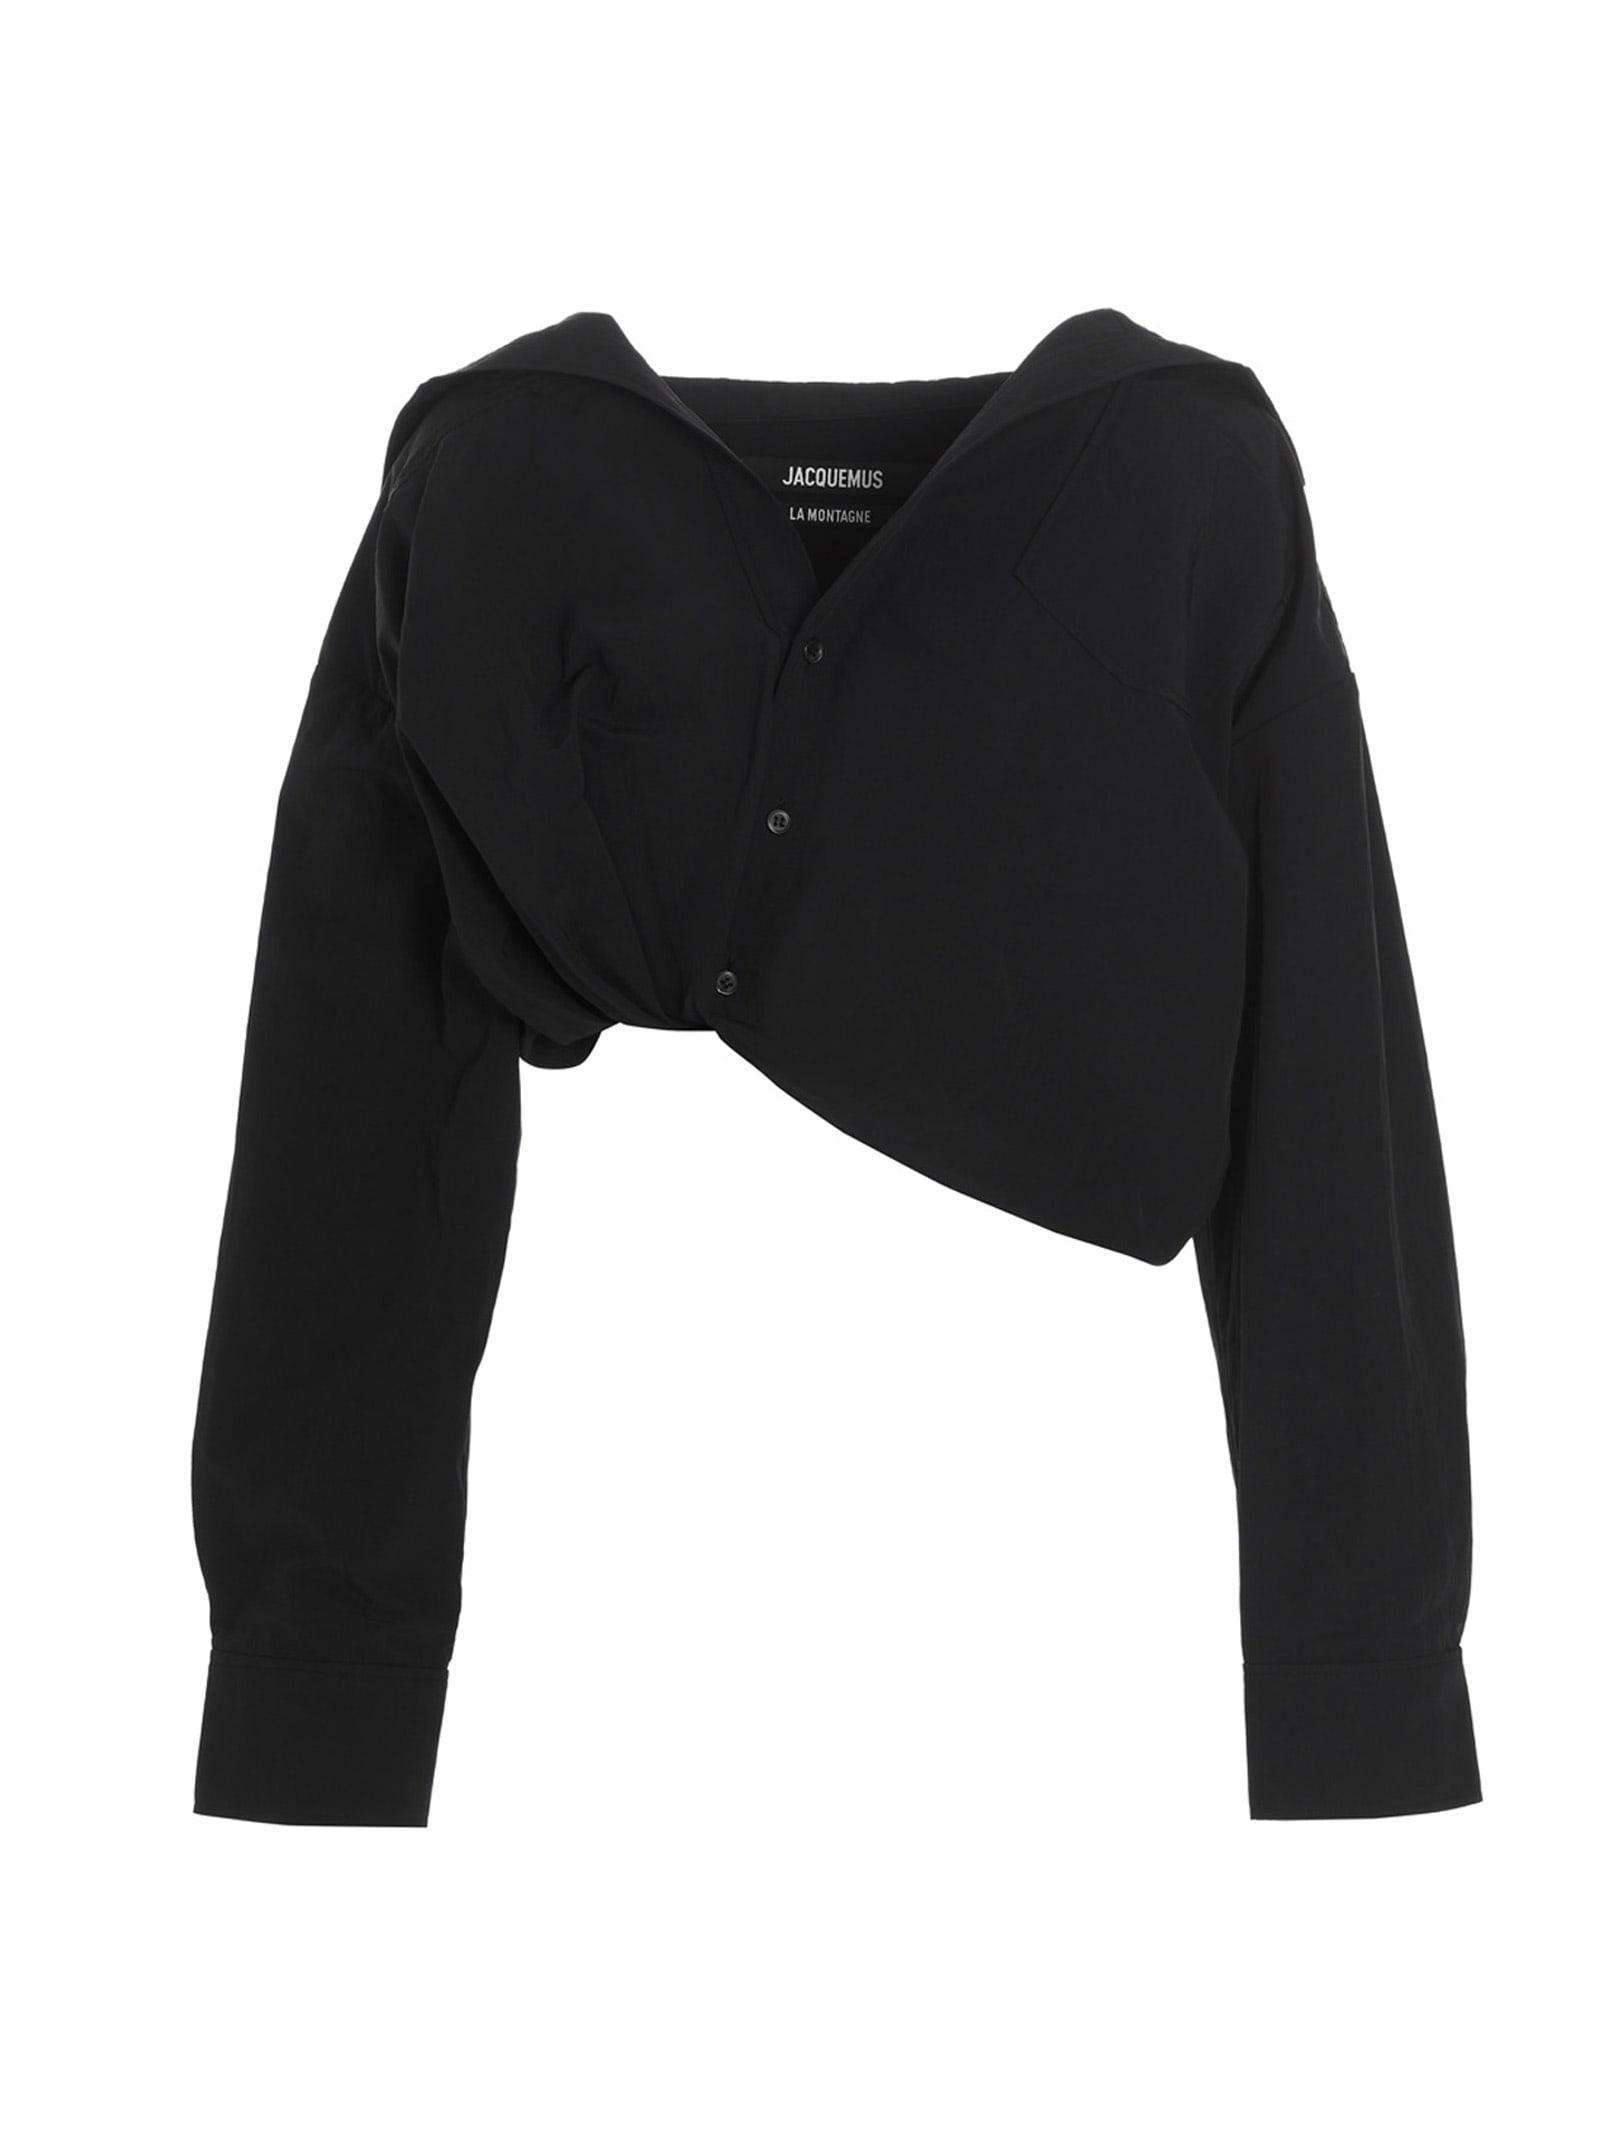 Jacquemus Synthetic La Chemise Mejean Shirt in Black | Lyst